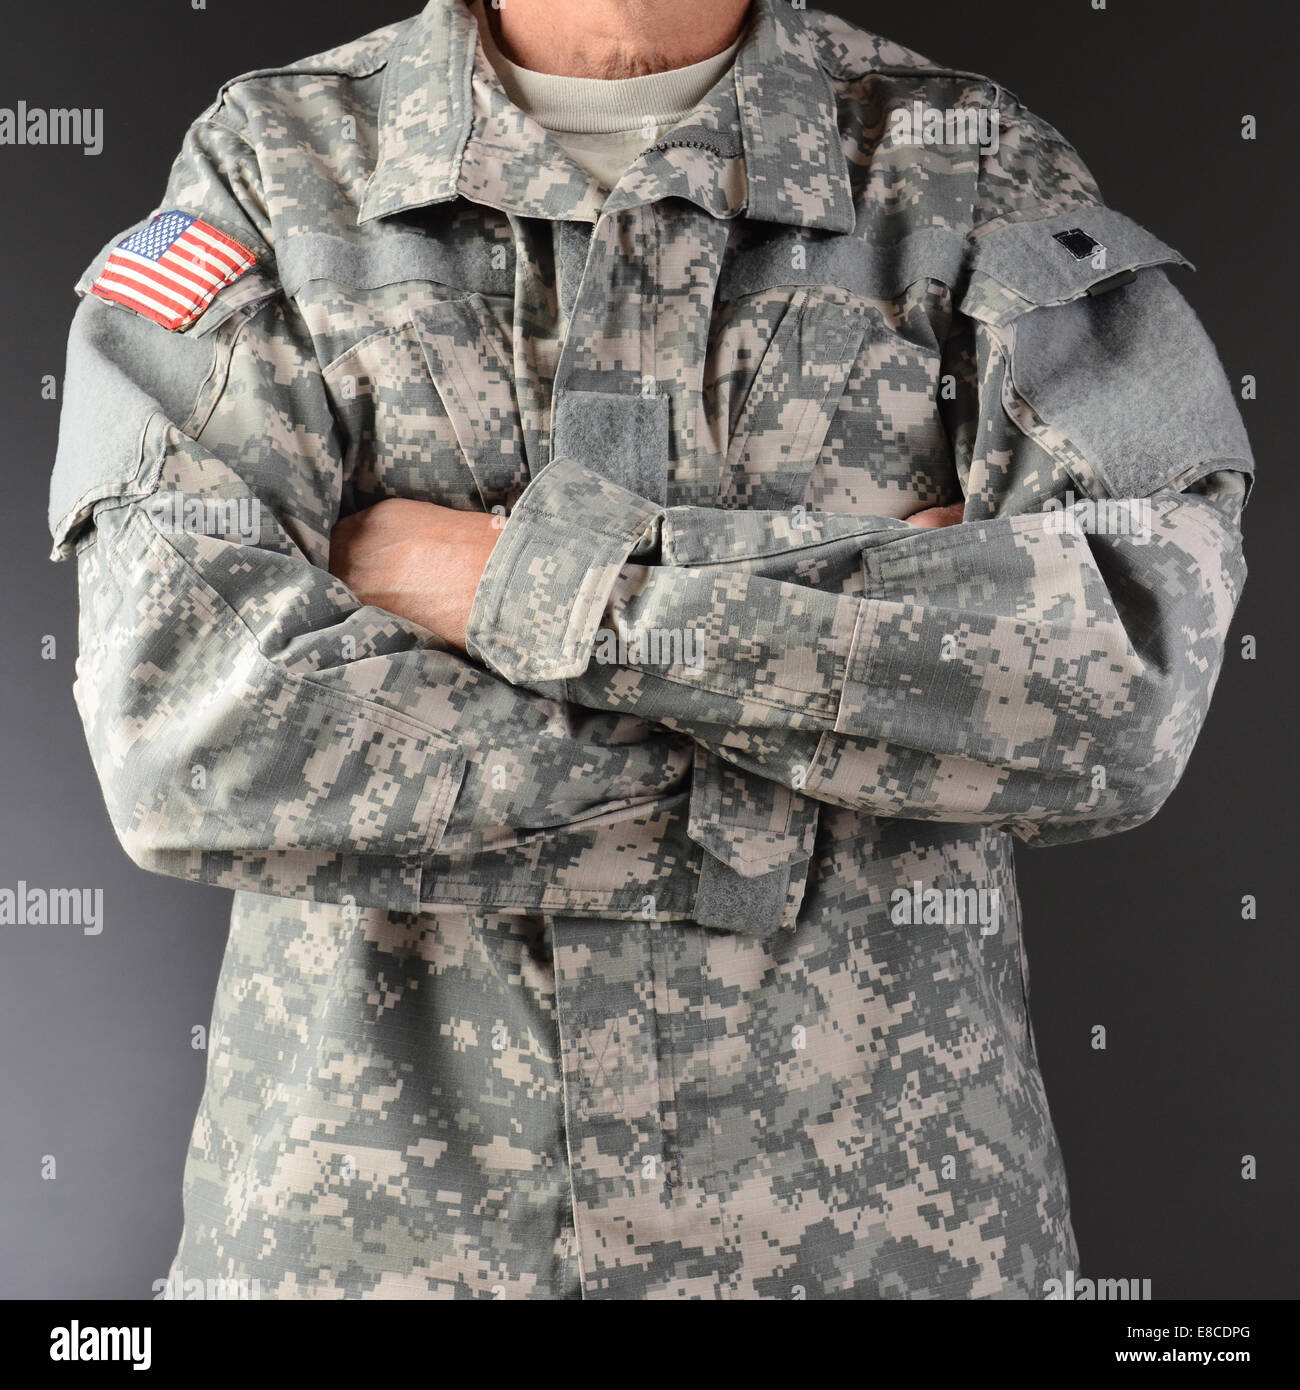 Closeup of a soldier wearing camouflage fatigues with his arms folded. Square format, man is unrecognizable. Stock Photo